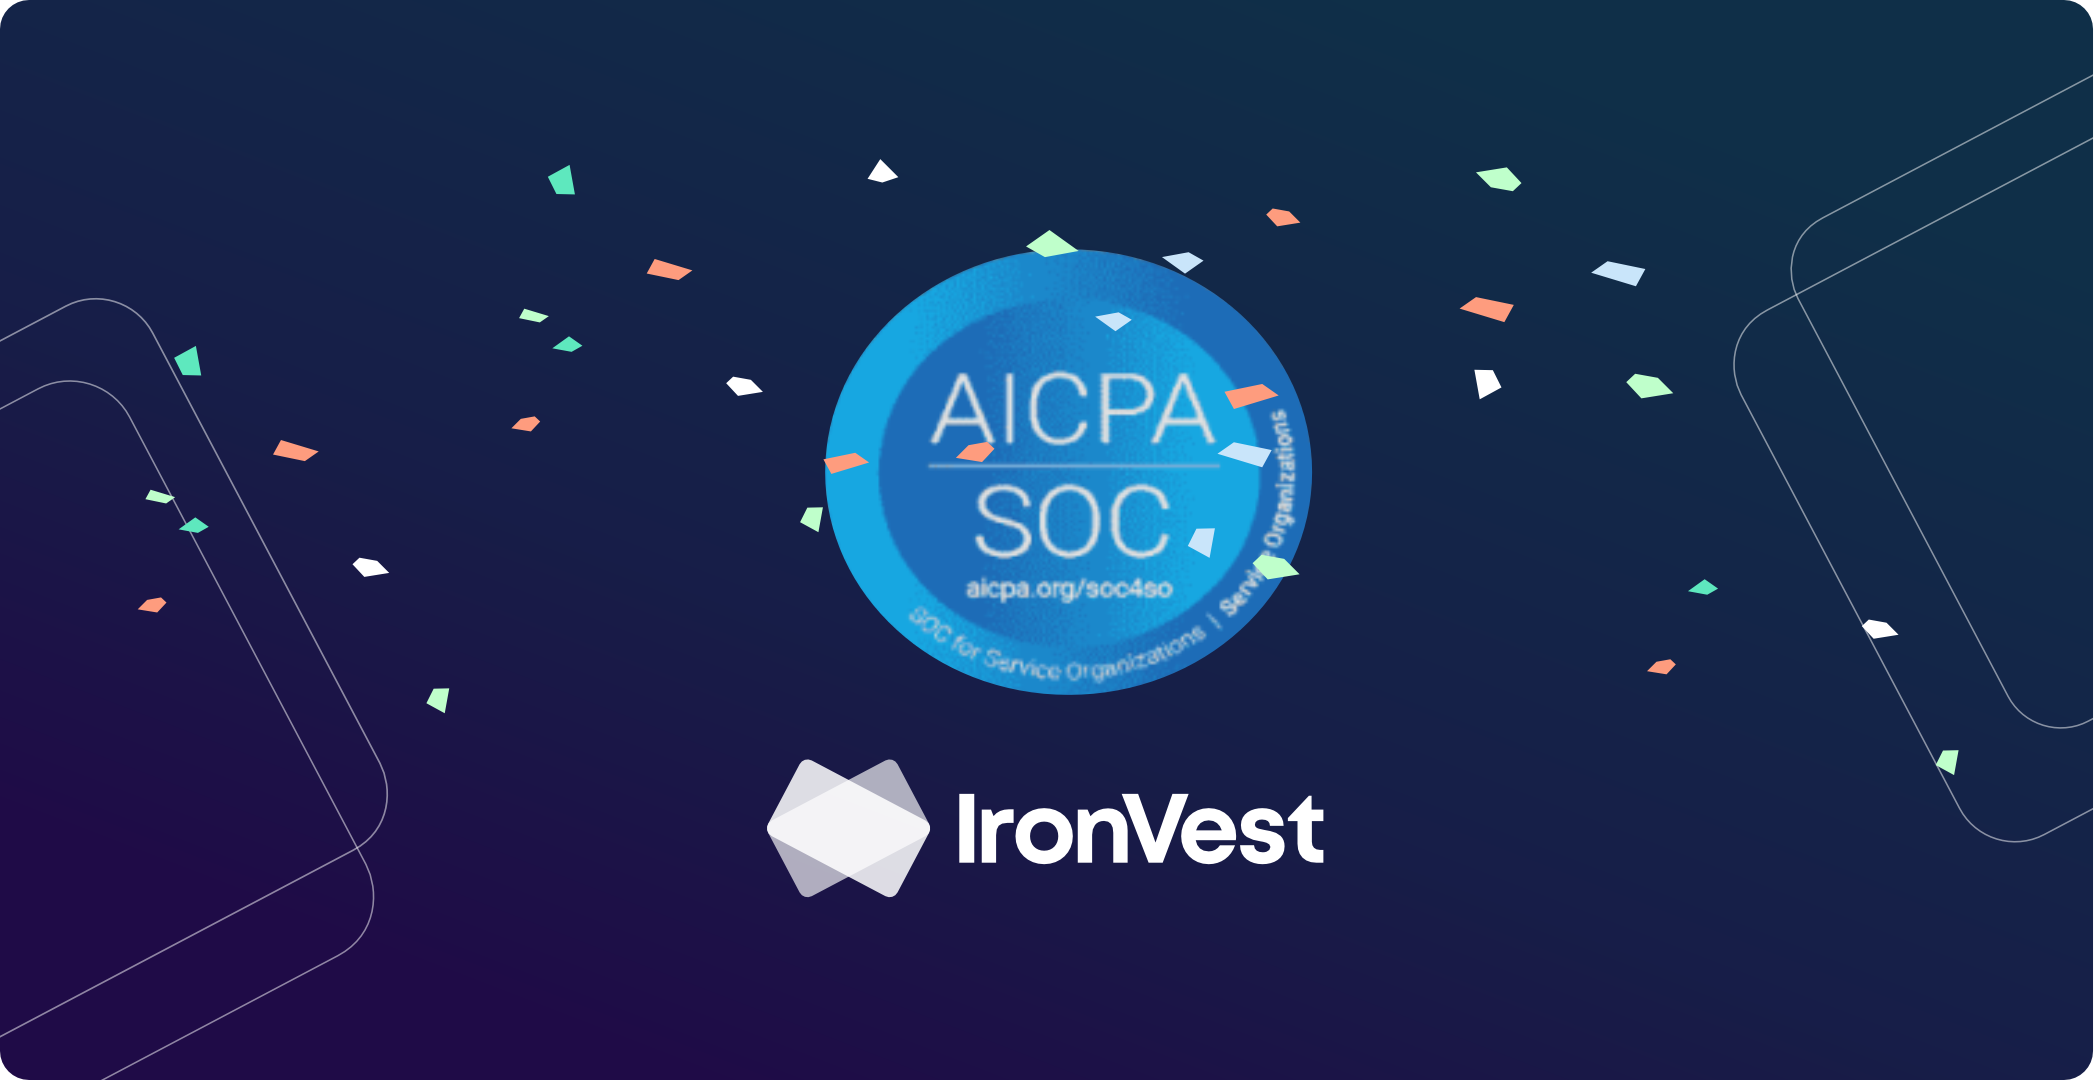 IronVest Achieves SOC 2 Type 1 and HIPAA Compliance: Ensuring Enterprise-Level Security for Customer Data